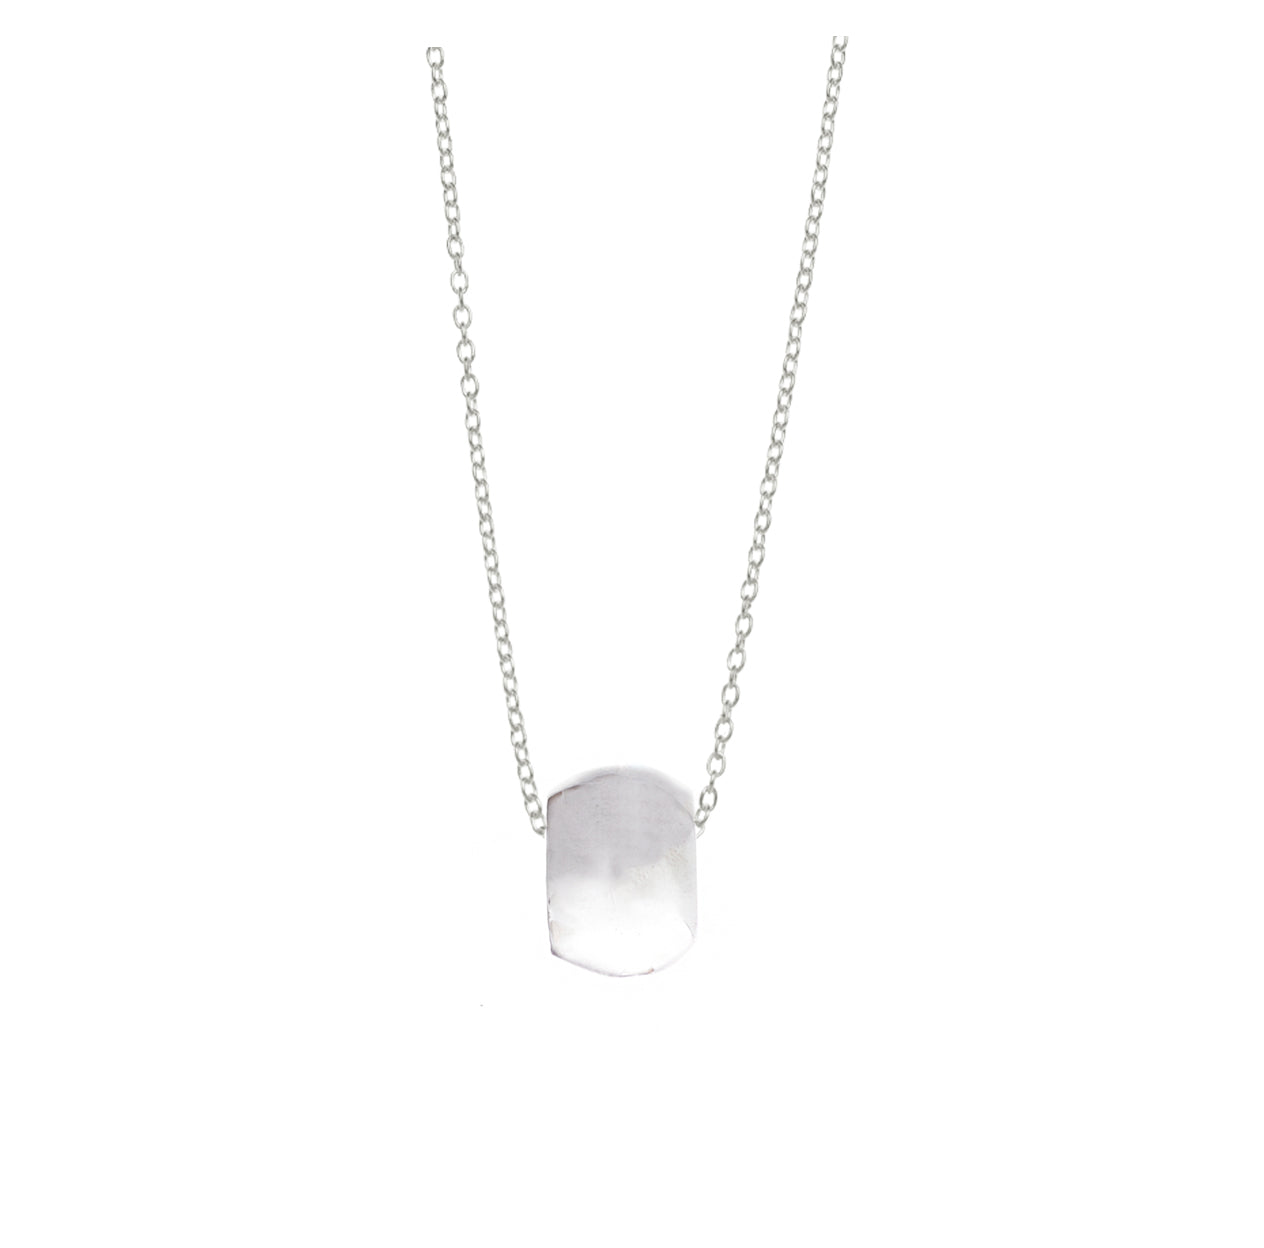 Spacer Sterling Silver Bead Necklace